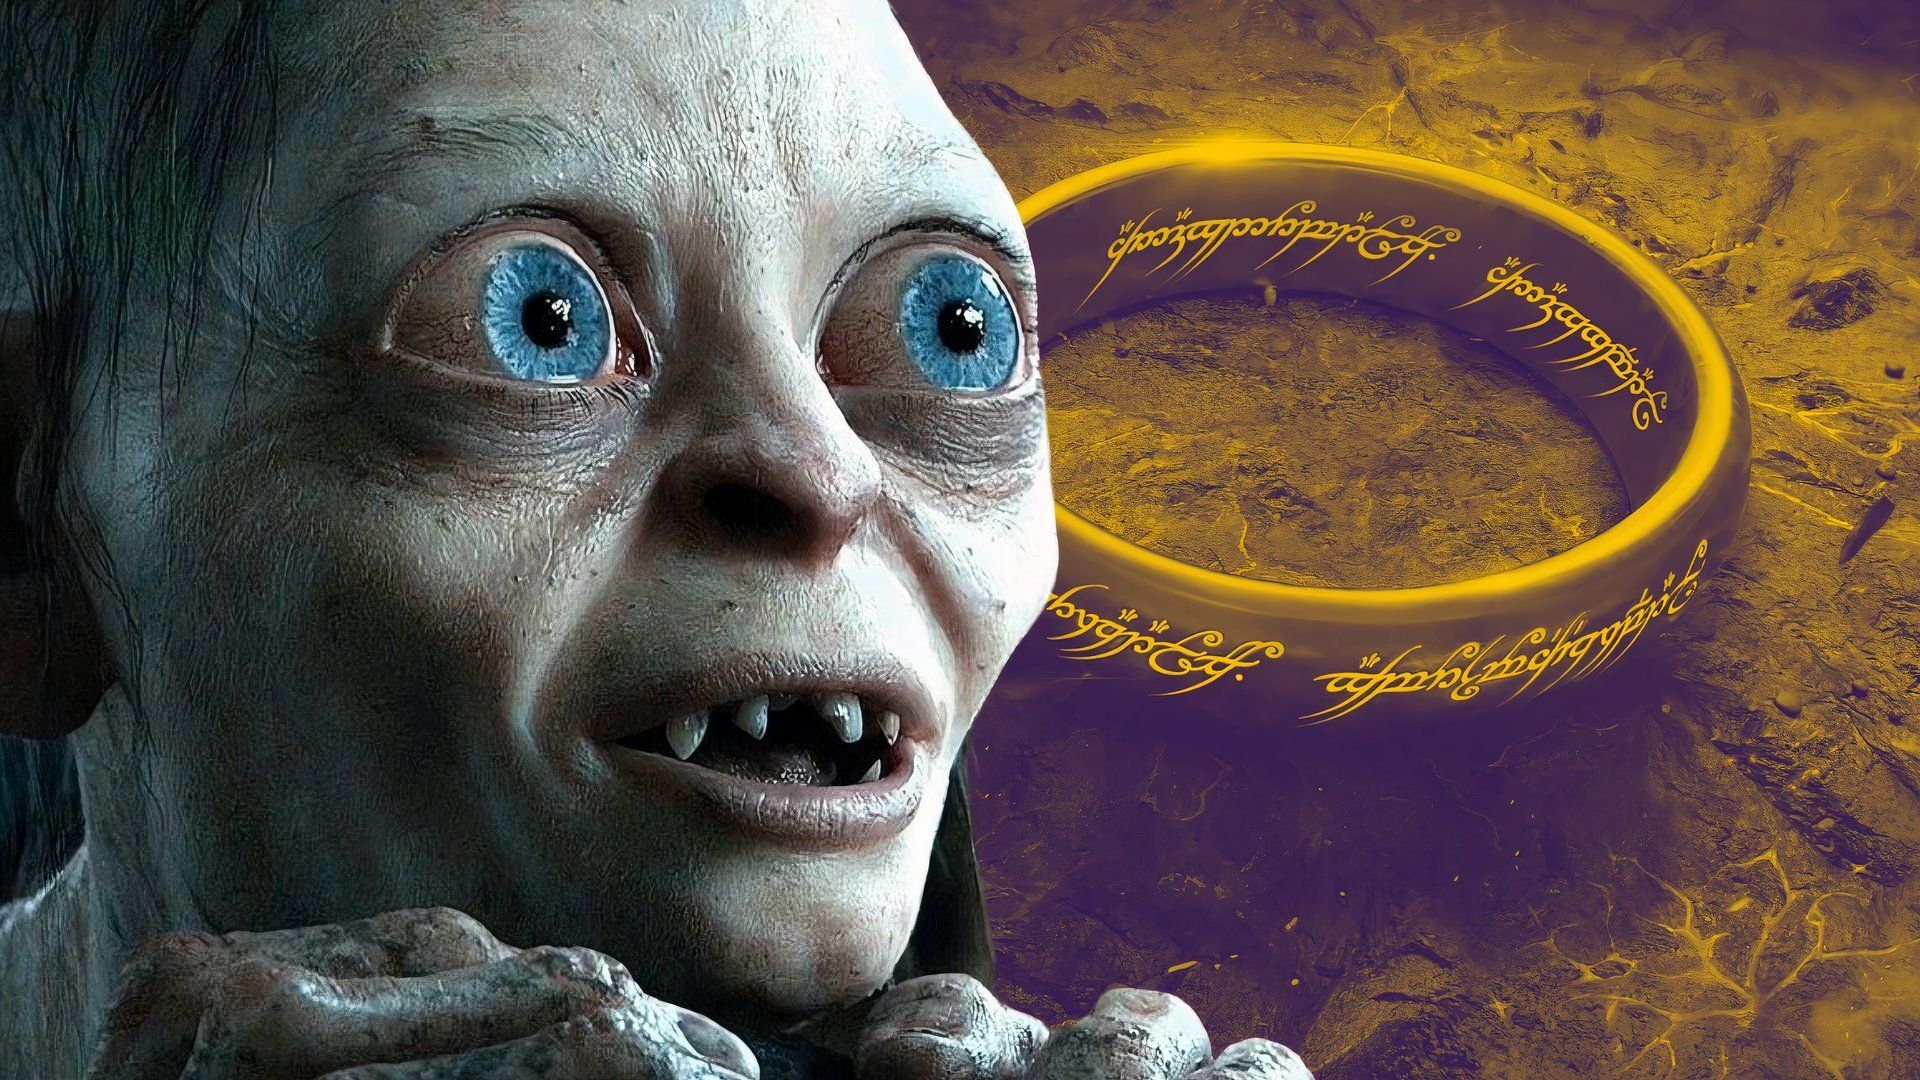 An edited image of Gollum looking at the one ring in The Lord of the Rings